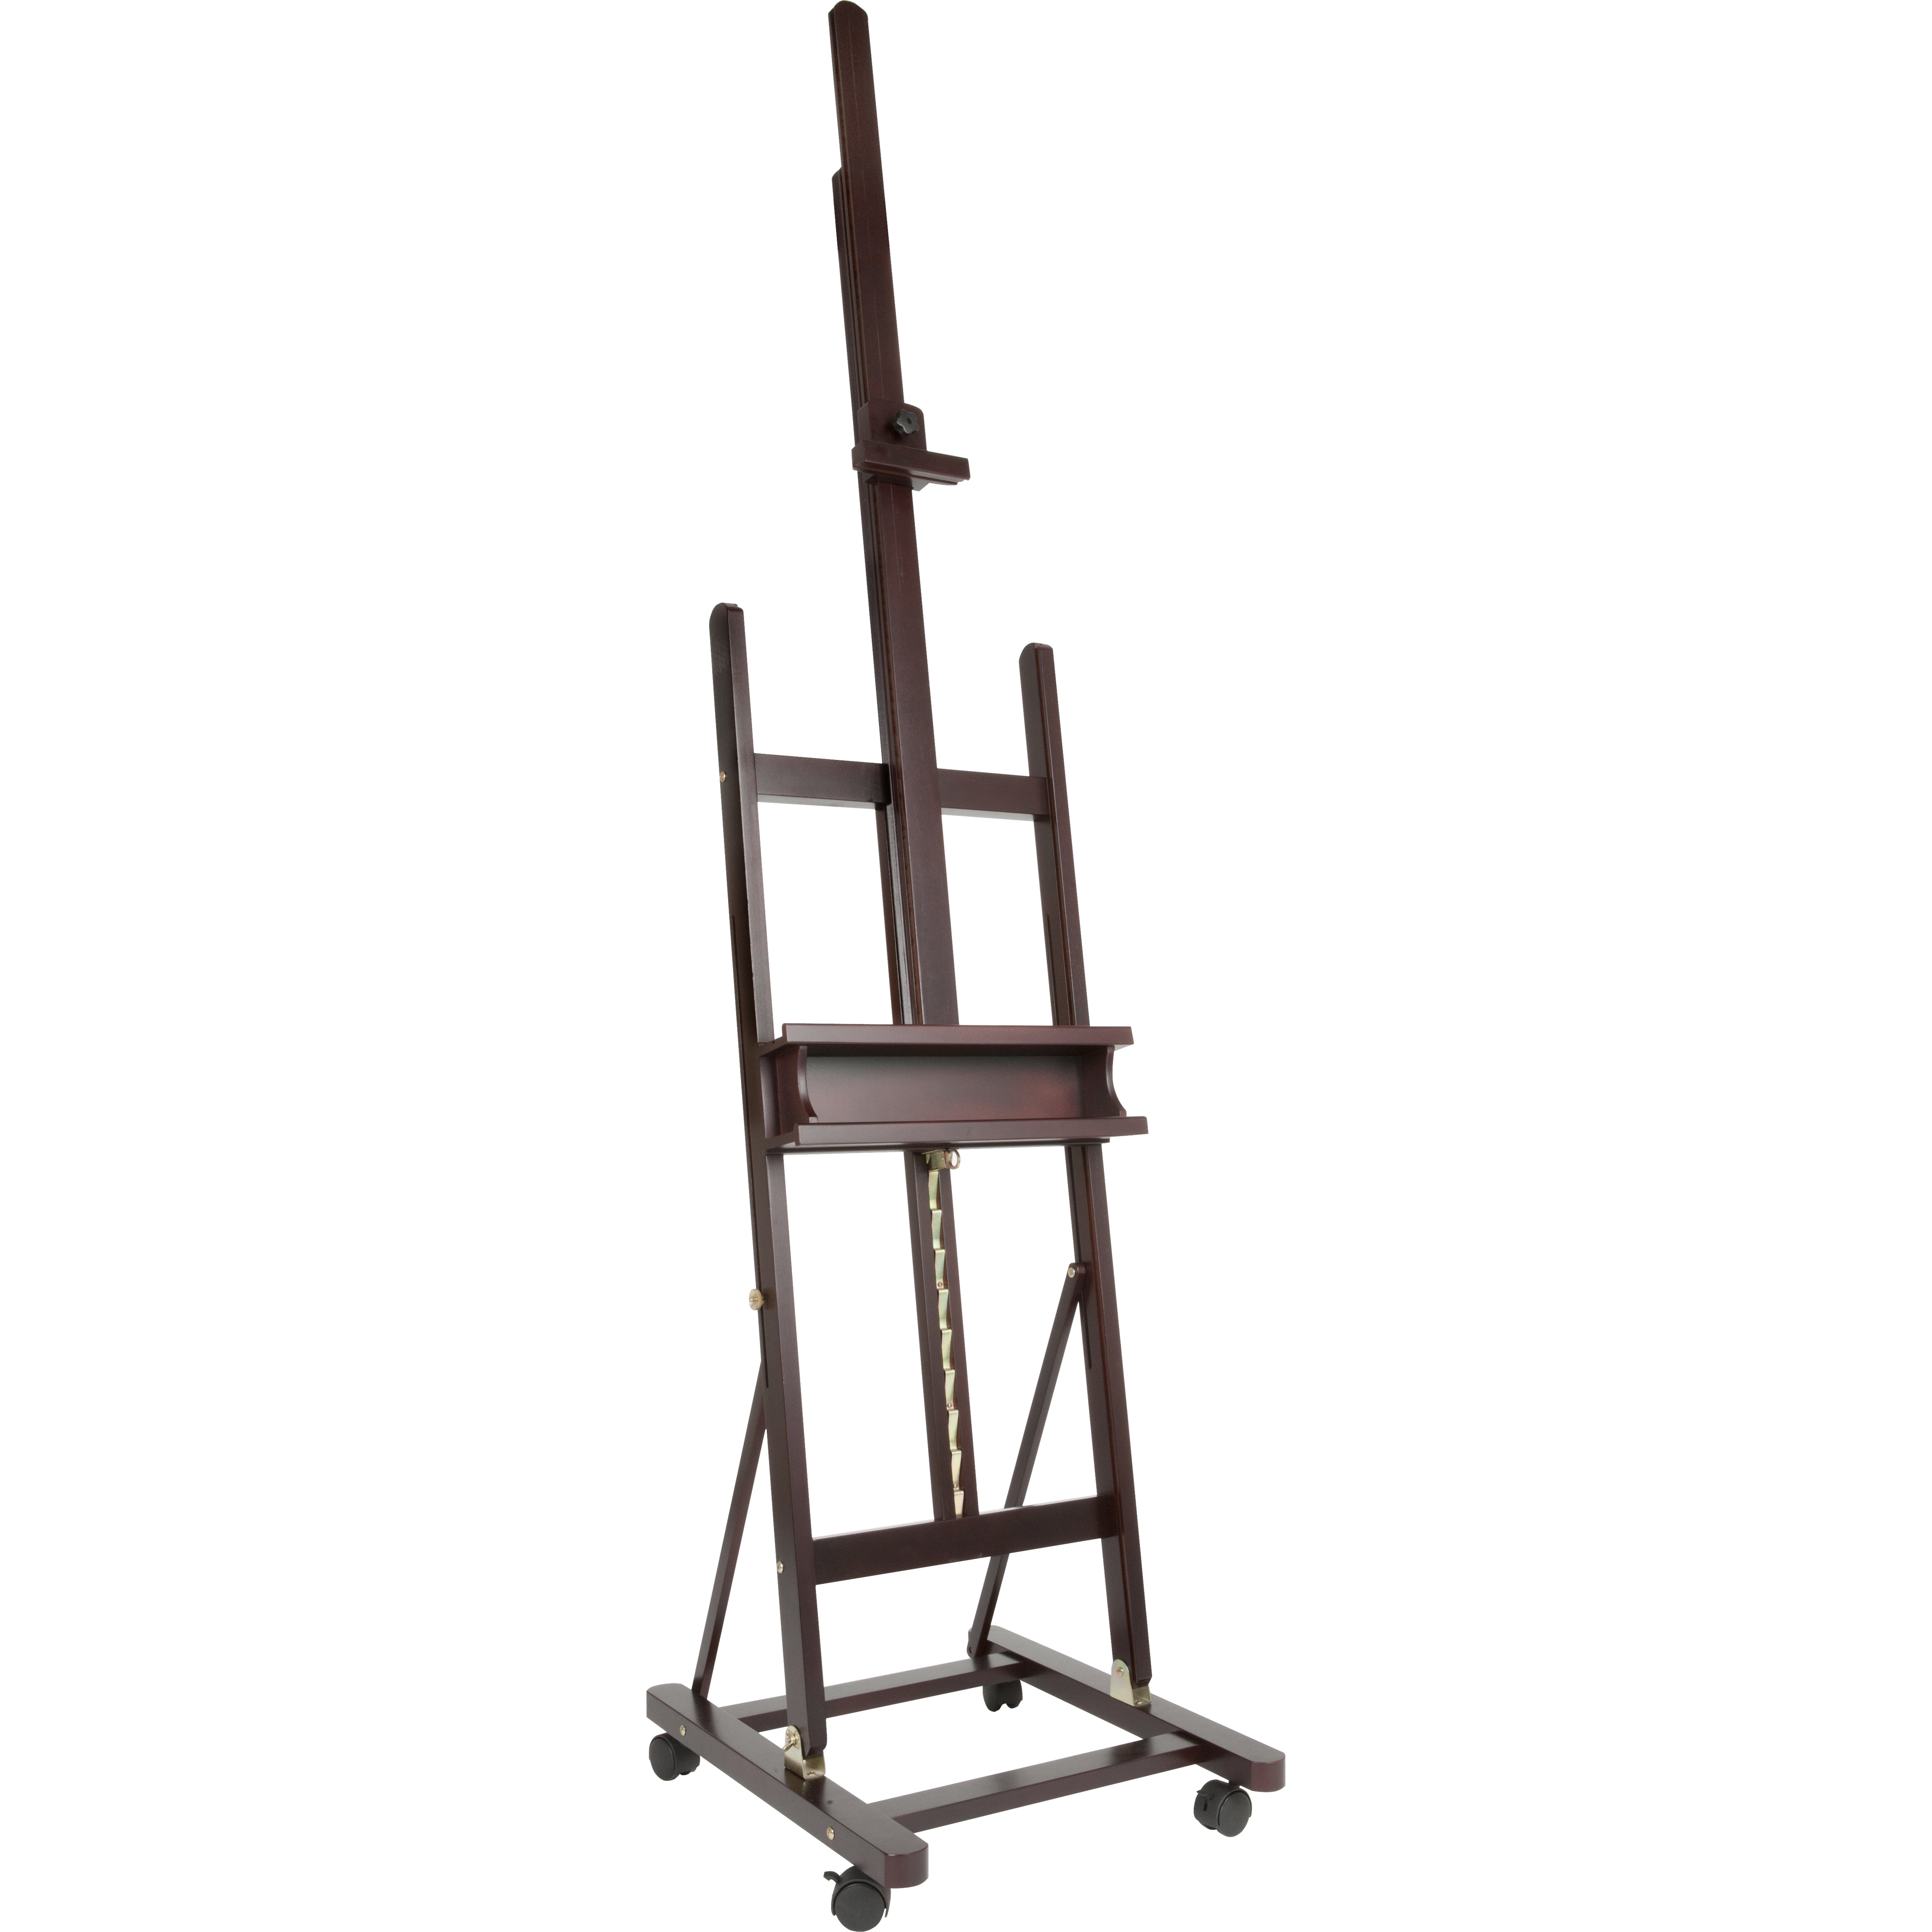 SoHo Urban Artist Extra Large 19.75 x 29.5 Adjustable Portable Drawing  Board Stand Easel, 5 Positions, Natural Beechwood Finish